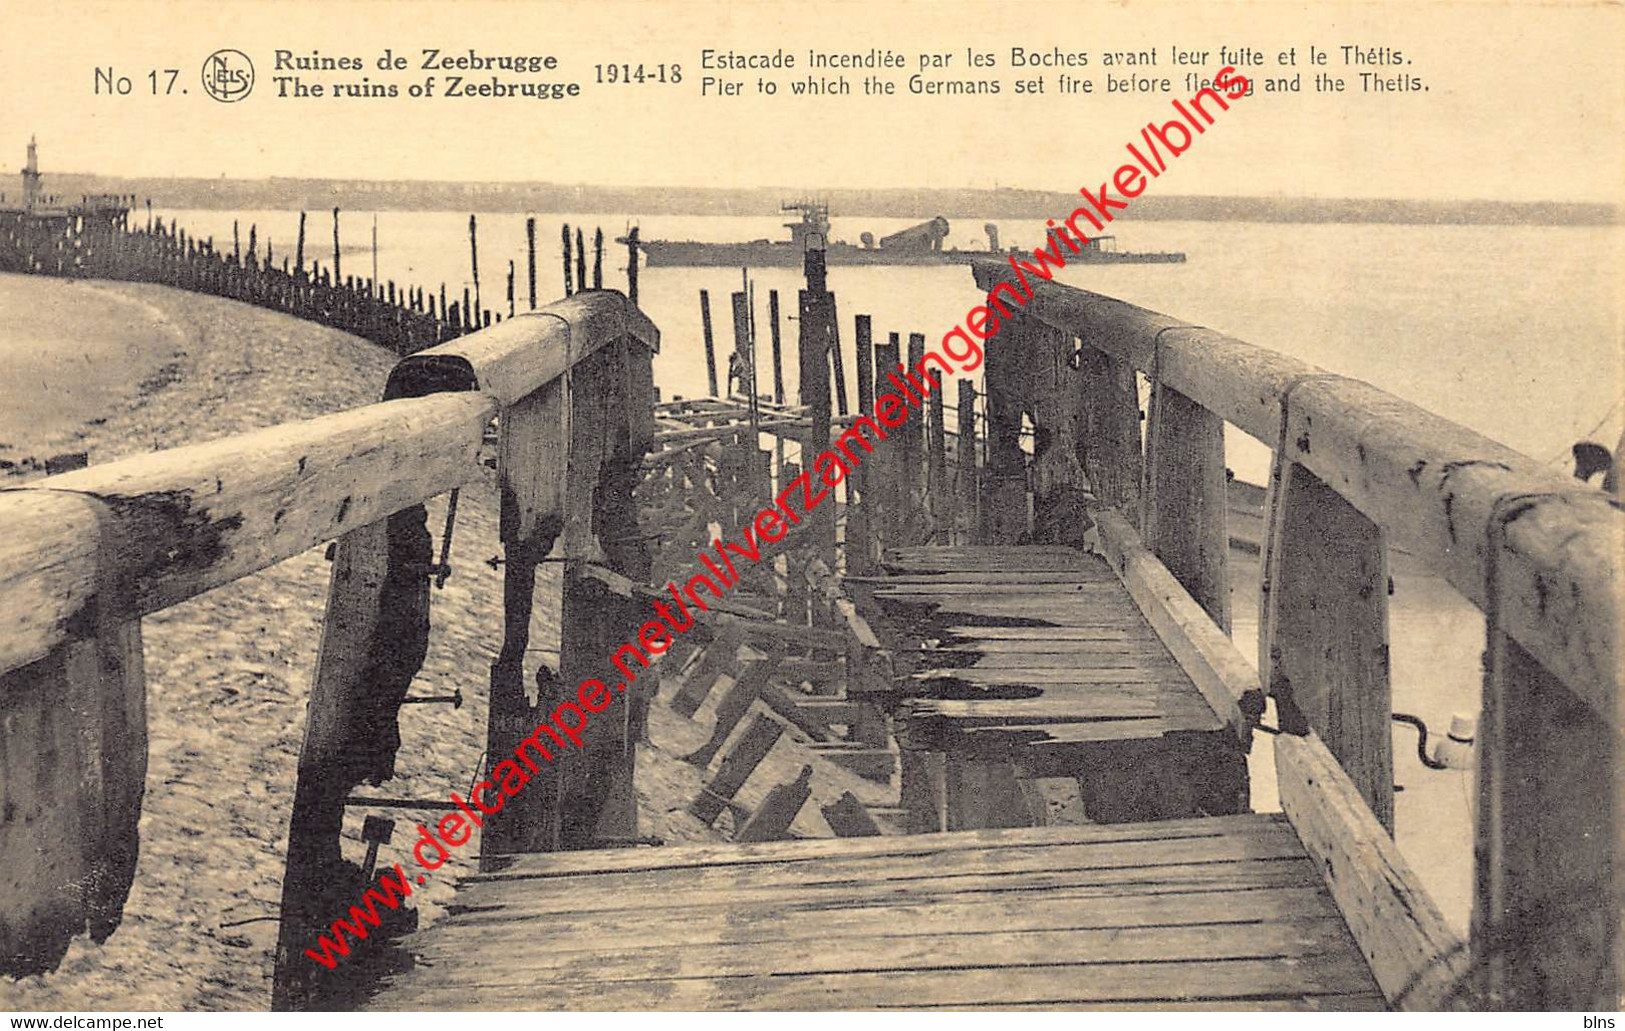 Pier To Which The Germans Set Fire Before Fleeing And The Thetis- 1914-1918 - Zeebrugge - Zeebrugge